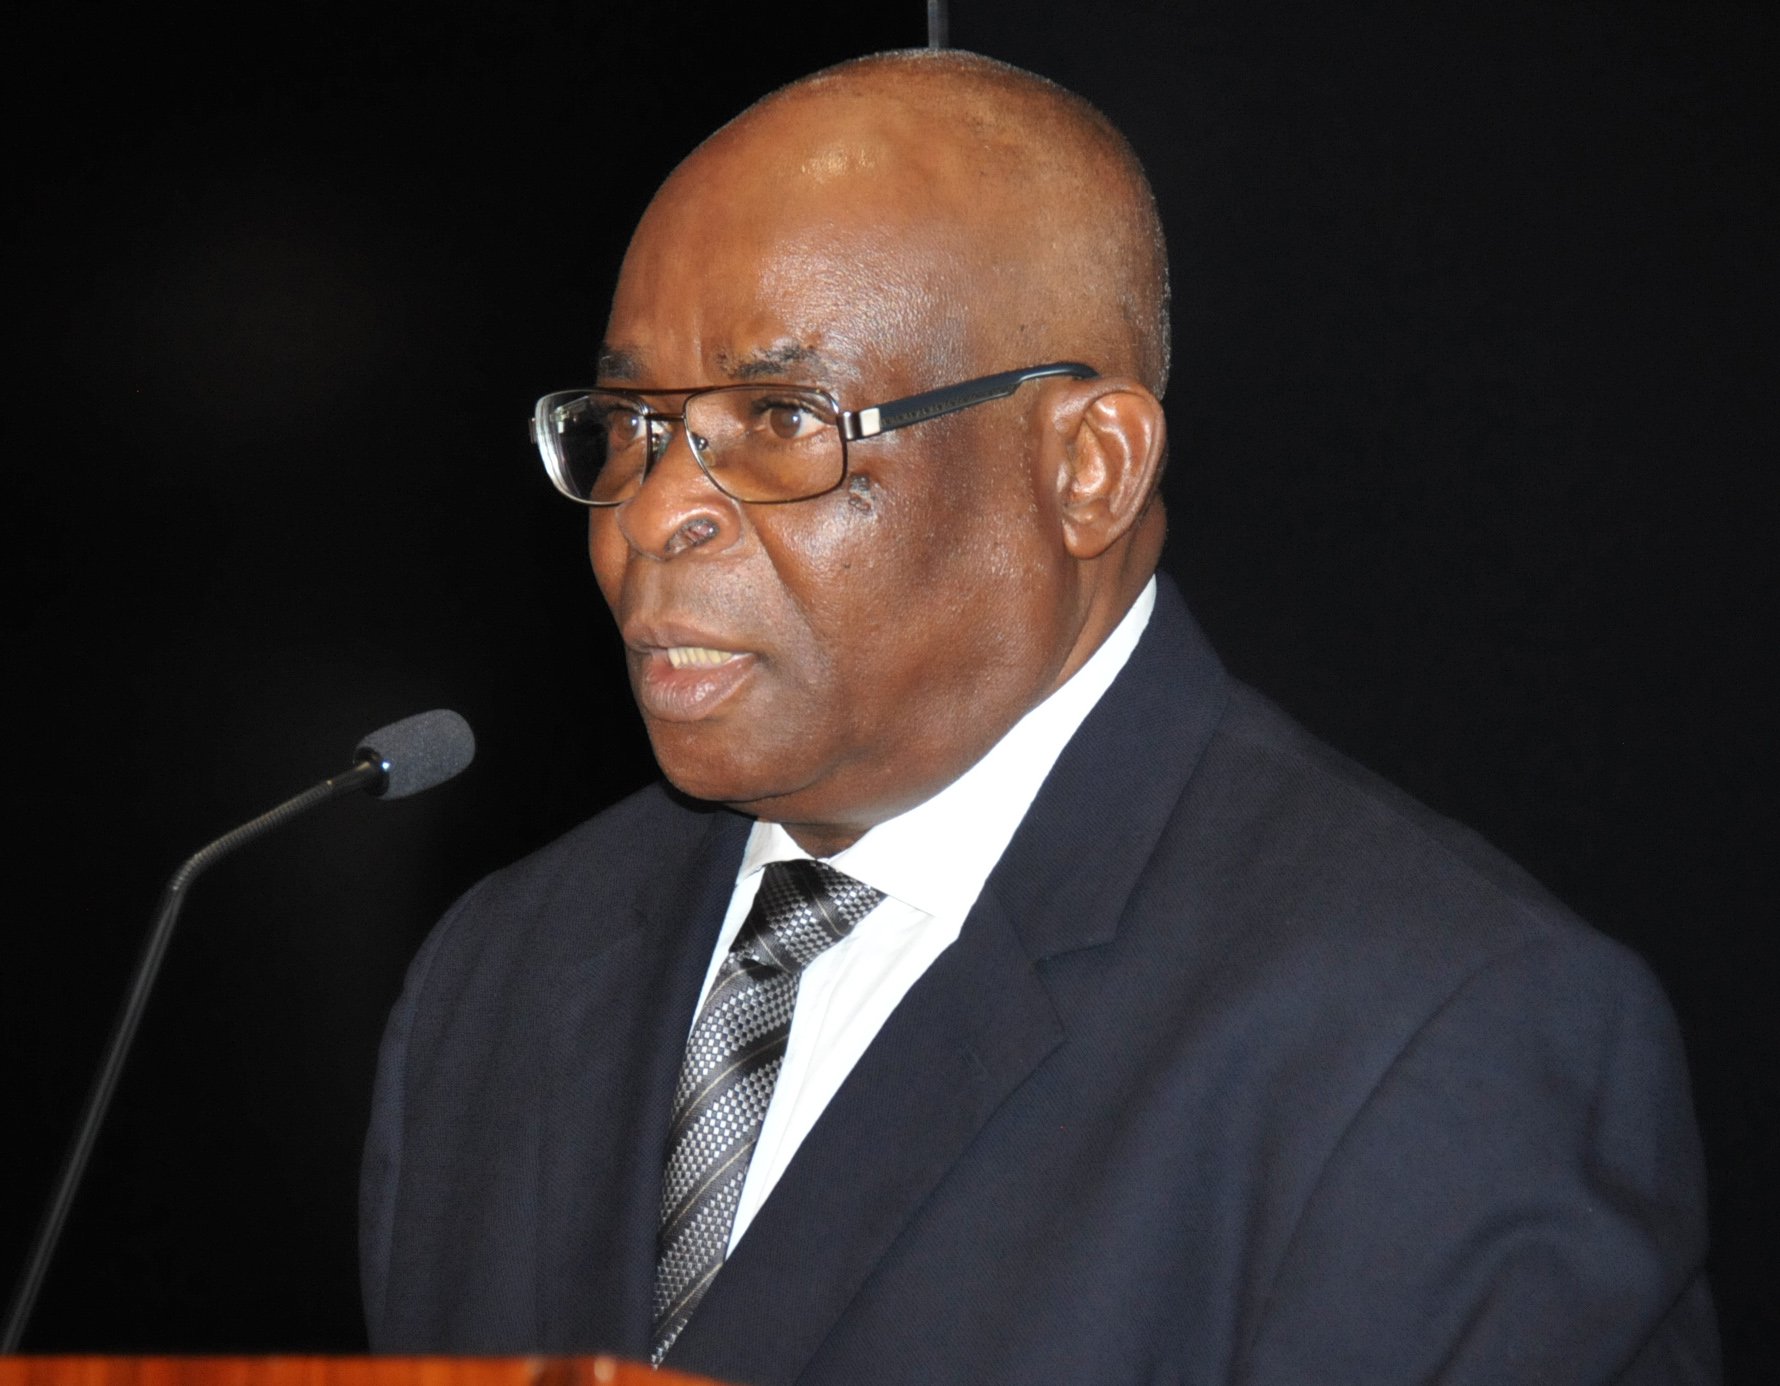 Onnoghen found guilty, banned from holding public office for 10 years